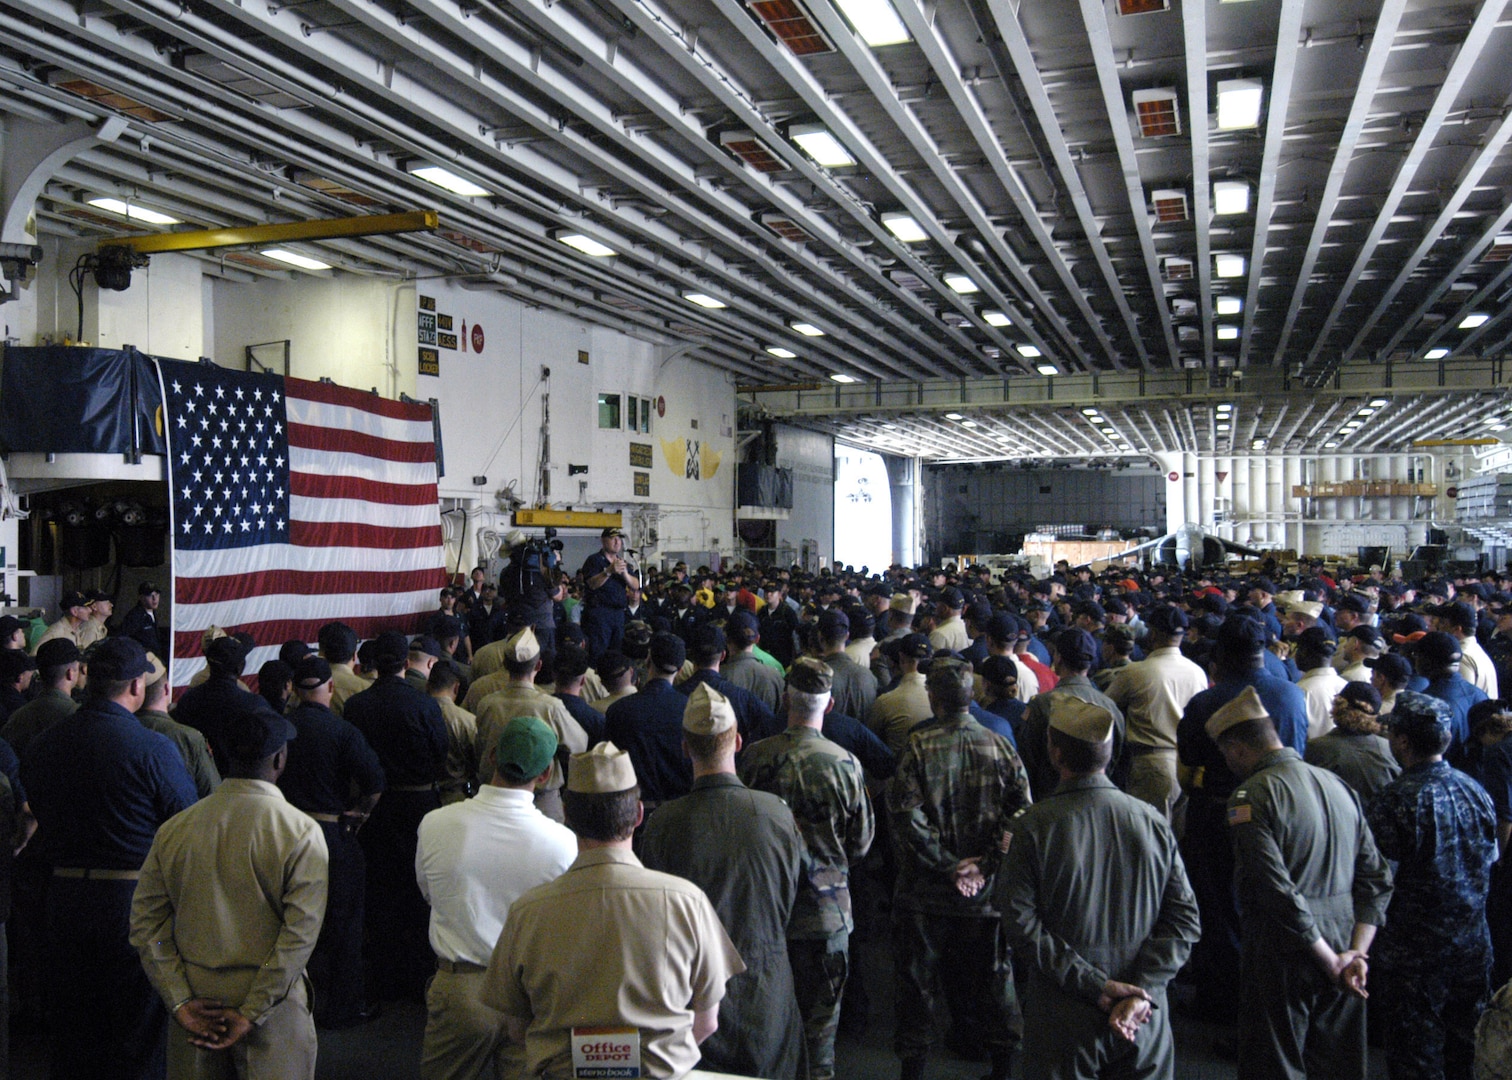 In September 2005, U.S. Coast Guard Vice Admiral Thad Allen, principle federal official for the federal response to Hurricane Katrina, addresses the crew of the USS Iwo Jima. The Navy’s involvement in the humanitarian assistance operations were led by the Federal Emergency Management Agency in conjunction with the Department of Defense.